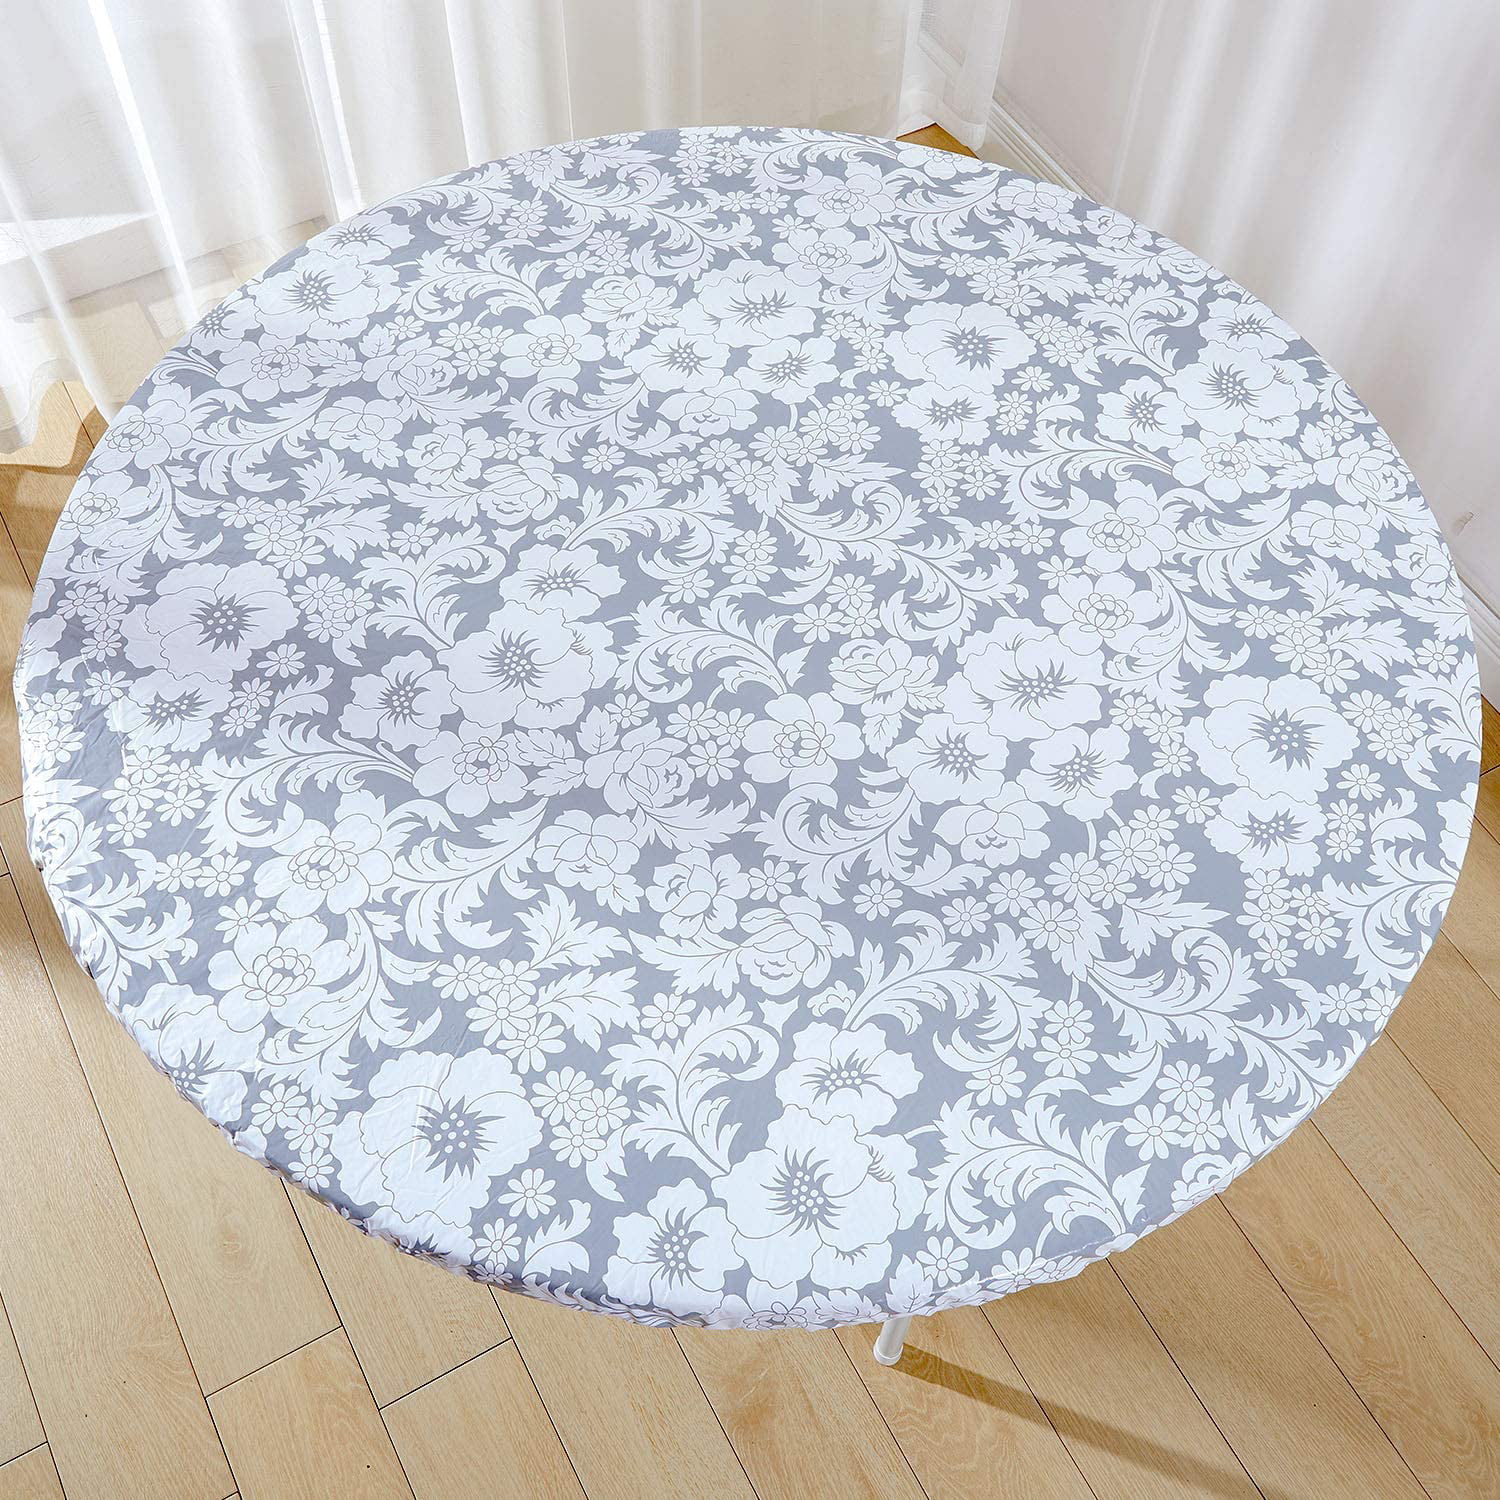 Vinyl Elastic Table Cover With Flannel, What Size Tablecloth For 44 Inch Round Table